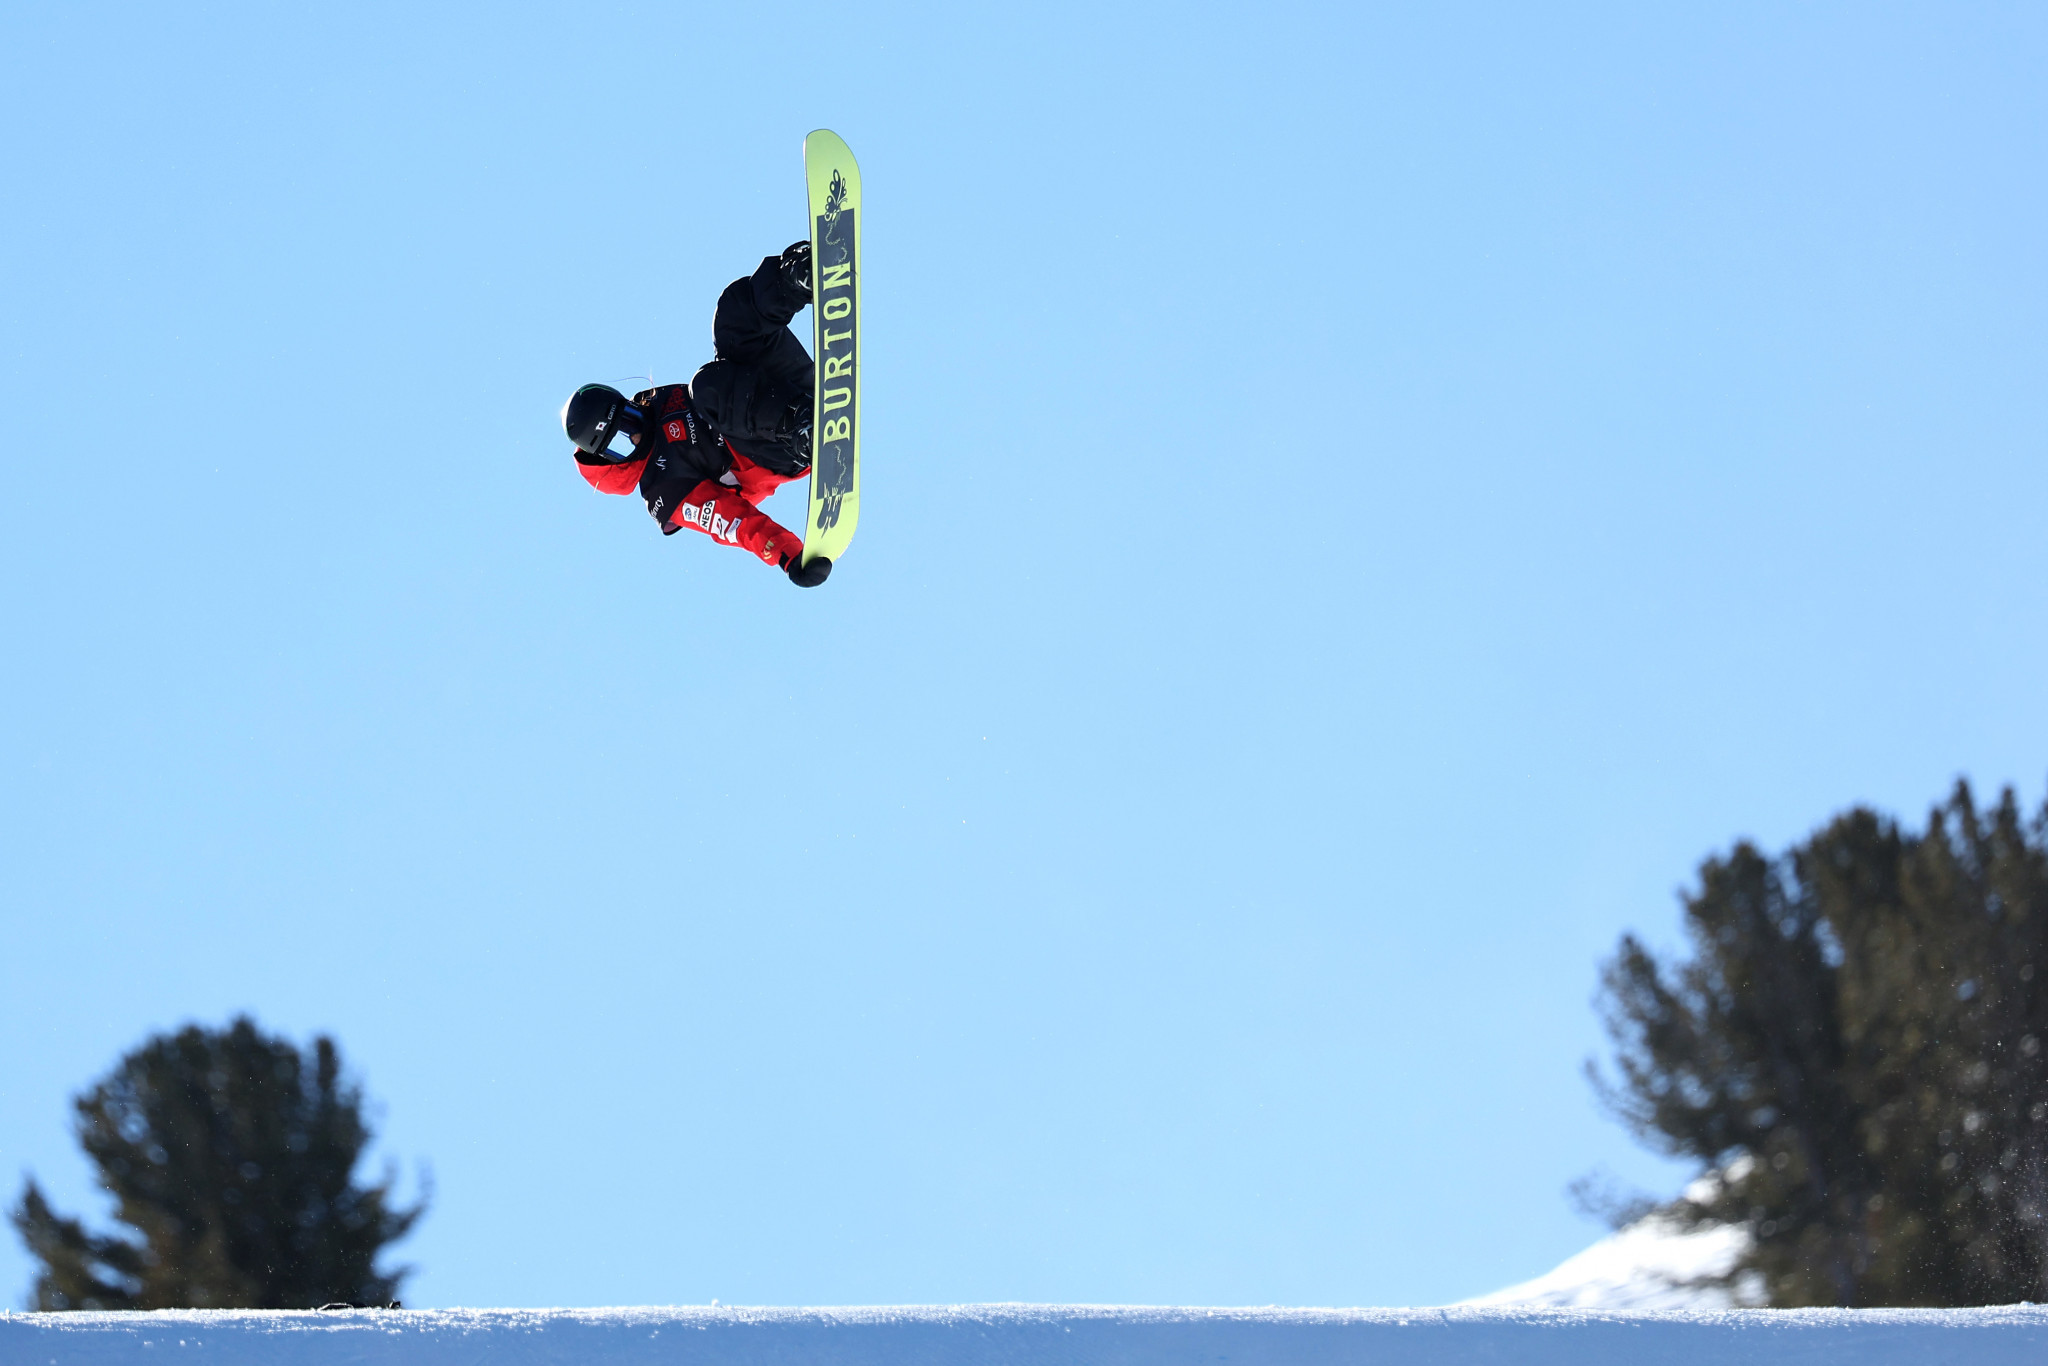 Kokomo Murase was top of the women's qualification in snowboard slopestyle ©Getty Images